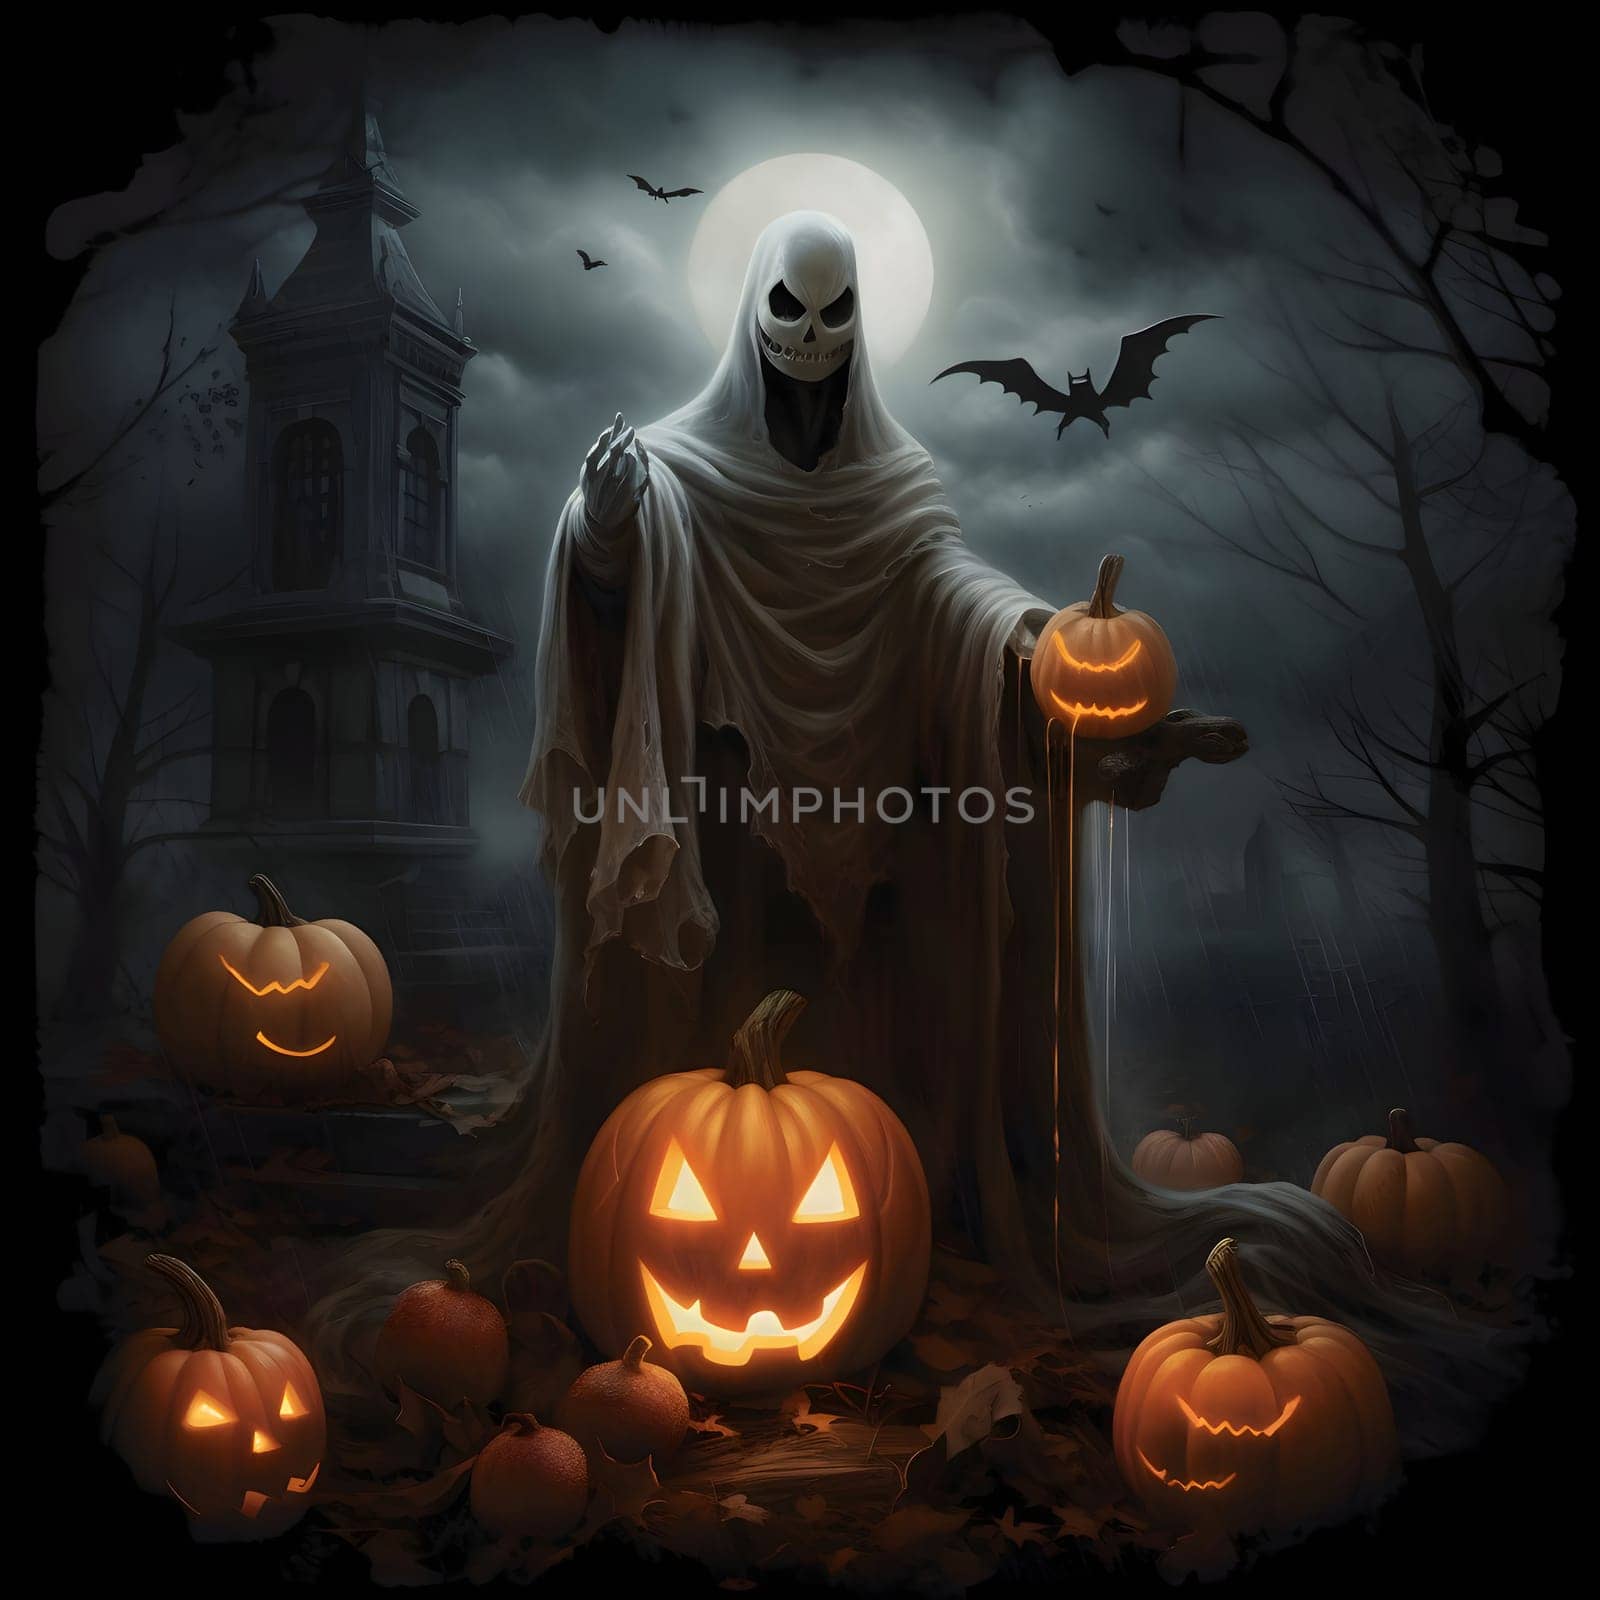 Monster, death holding pumpkins, all around glowing jack-o-lanterns, church tower in the background, midnight, flying bats and fog, a Halloween image. Atmosphere of darkness fear.